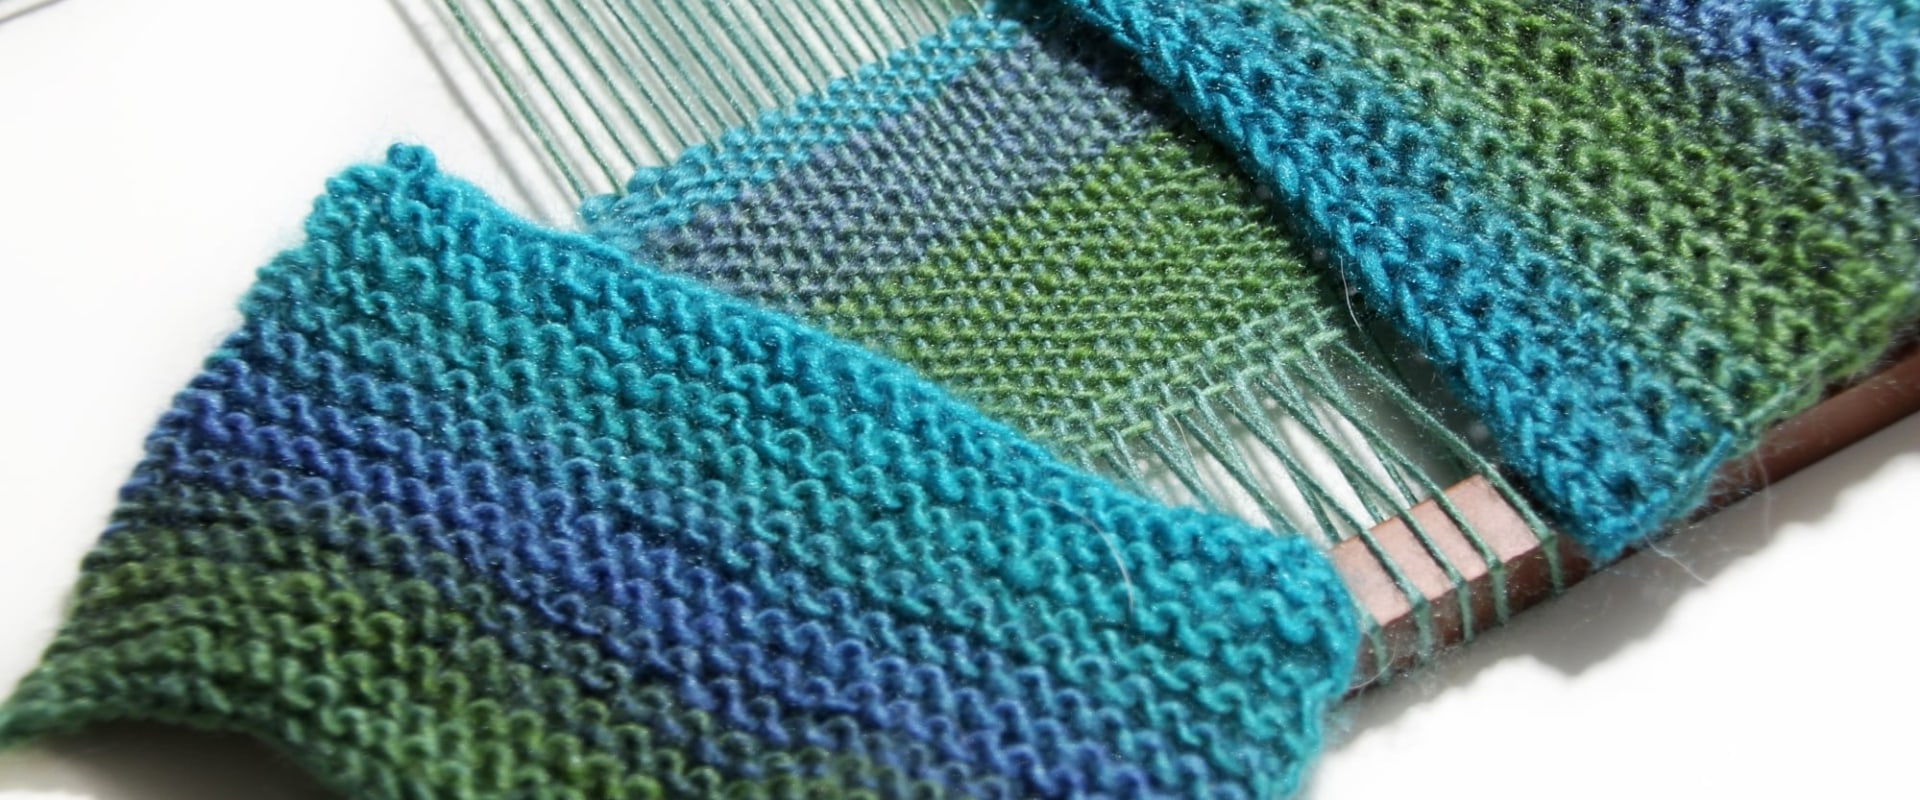 What Came First: Weaving or Knitting?